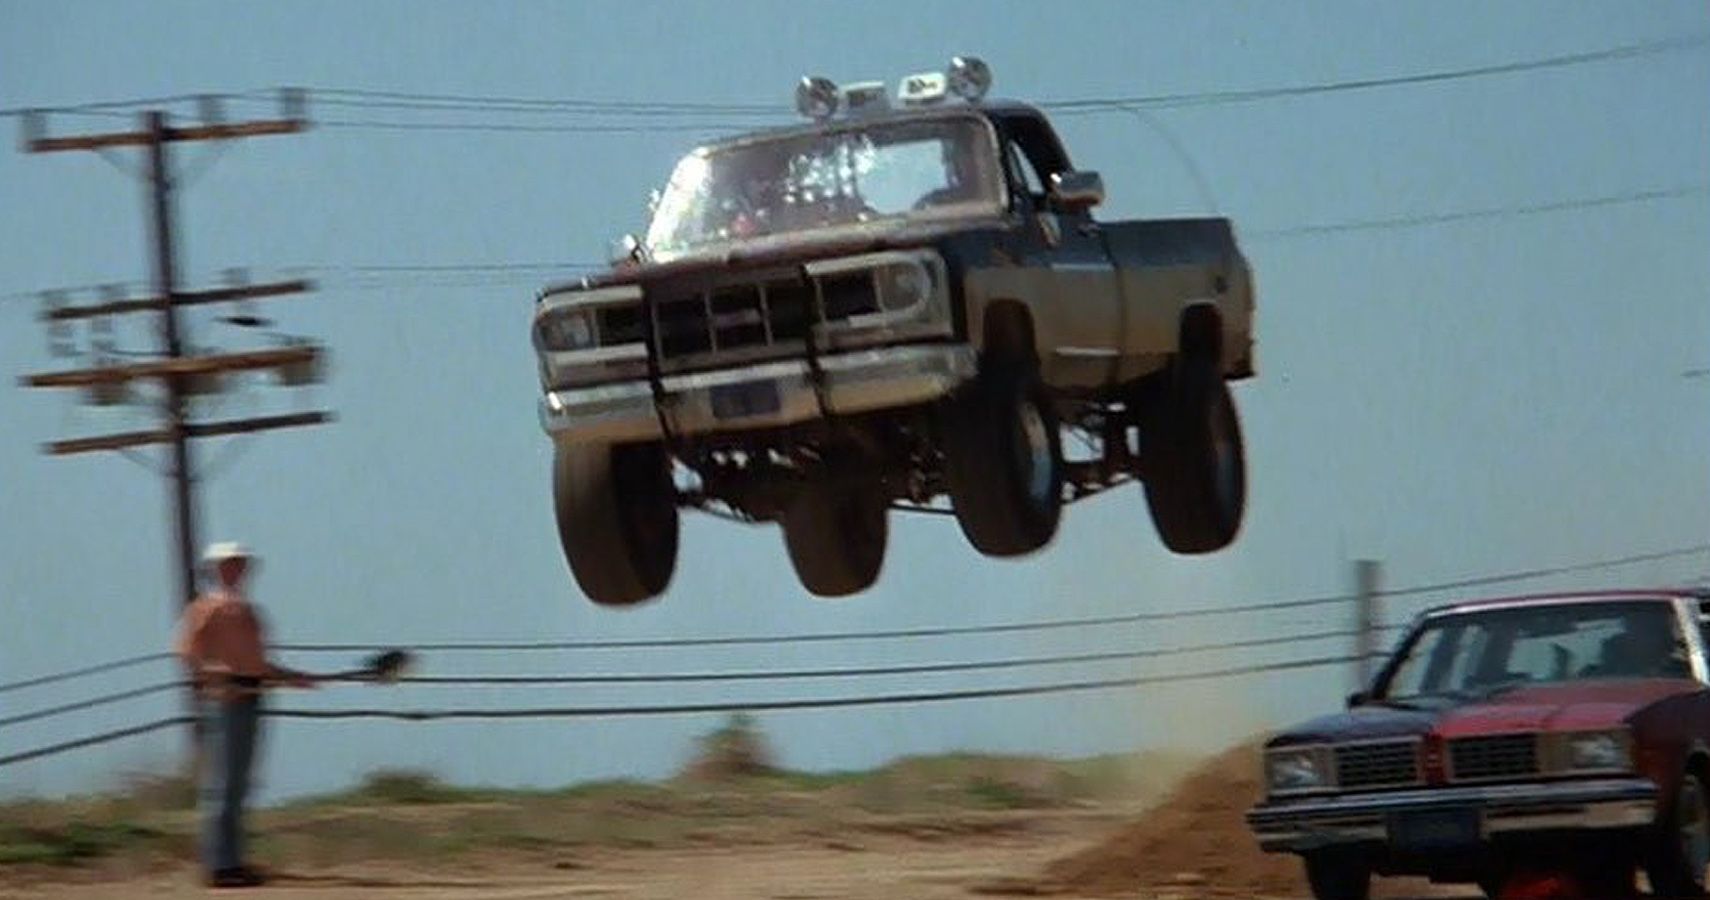 The Fall Guy GMC Truck Did Everything A Normal GMC Could Never Do, Unless It Was Being Driven By Lee Majors